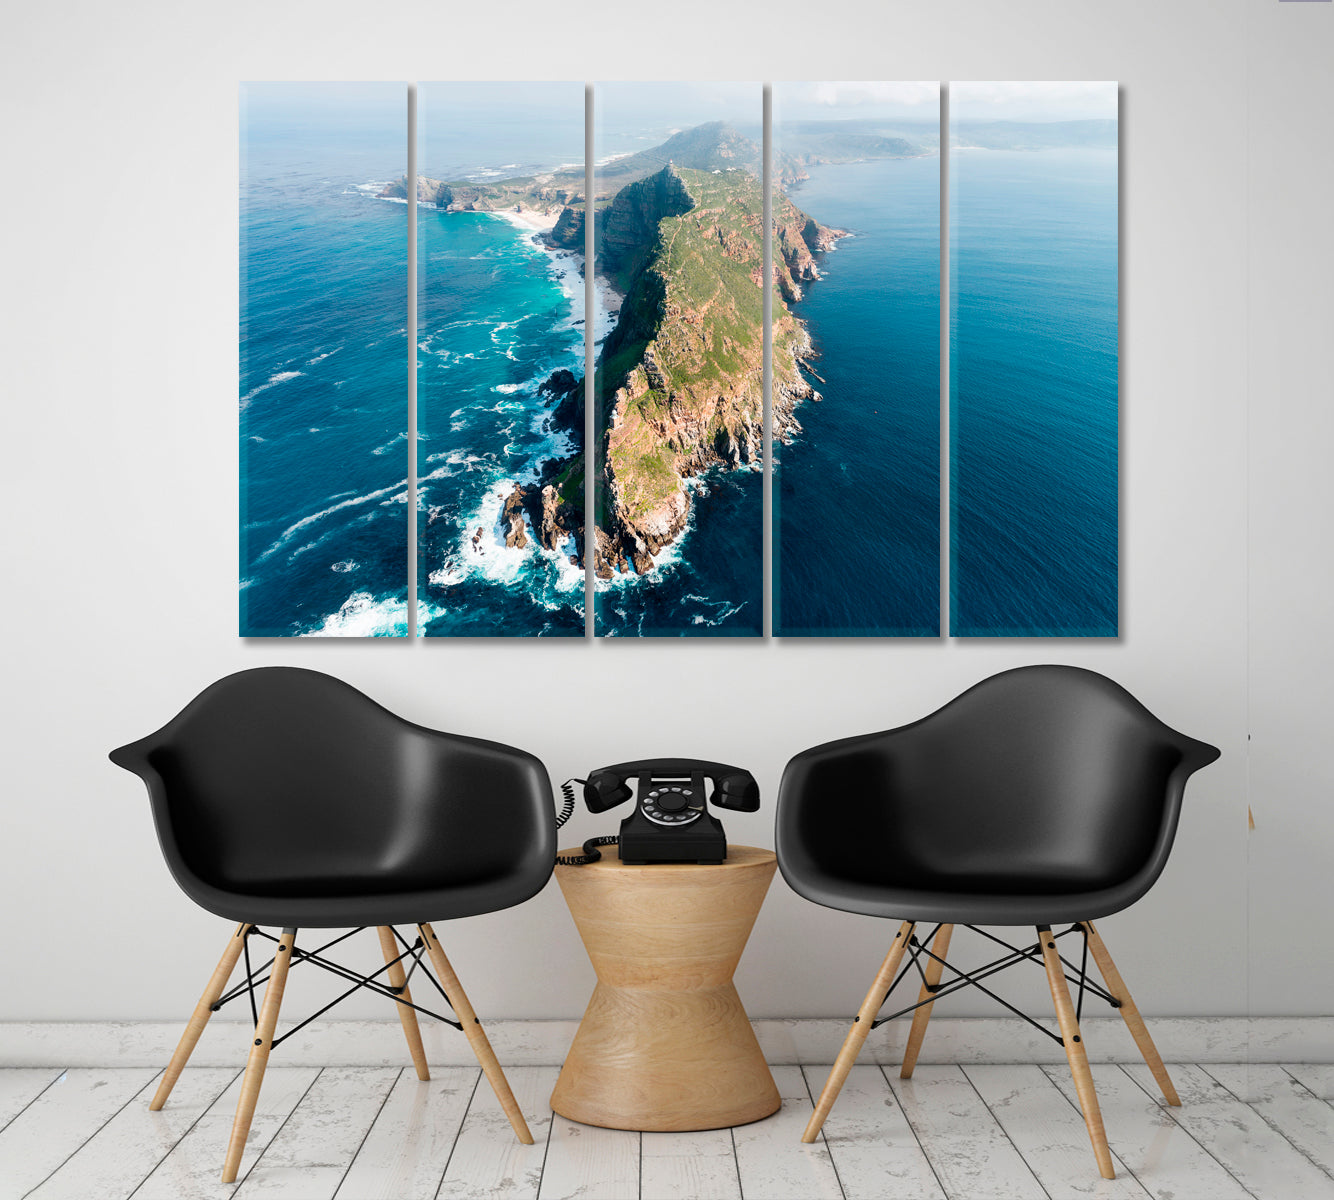 Where Two Oceans Meet in Cape Point South Africa Cities Wall Art Artesty   